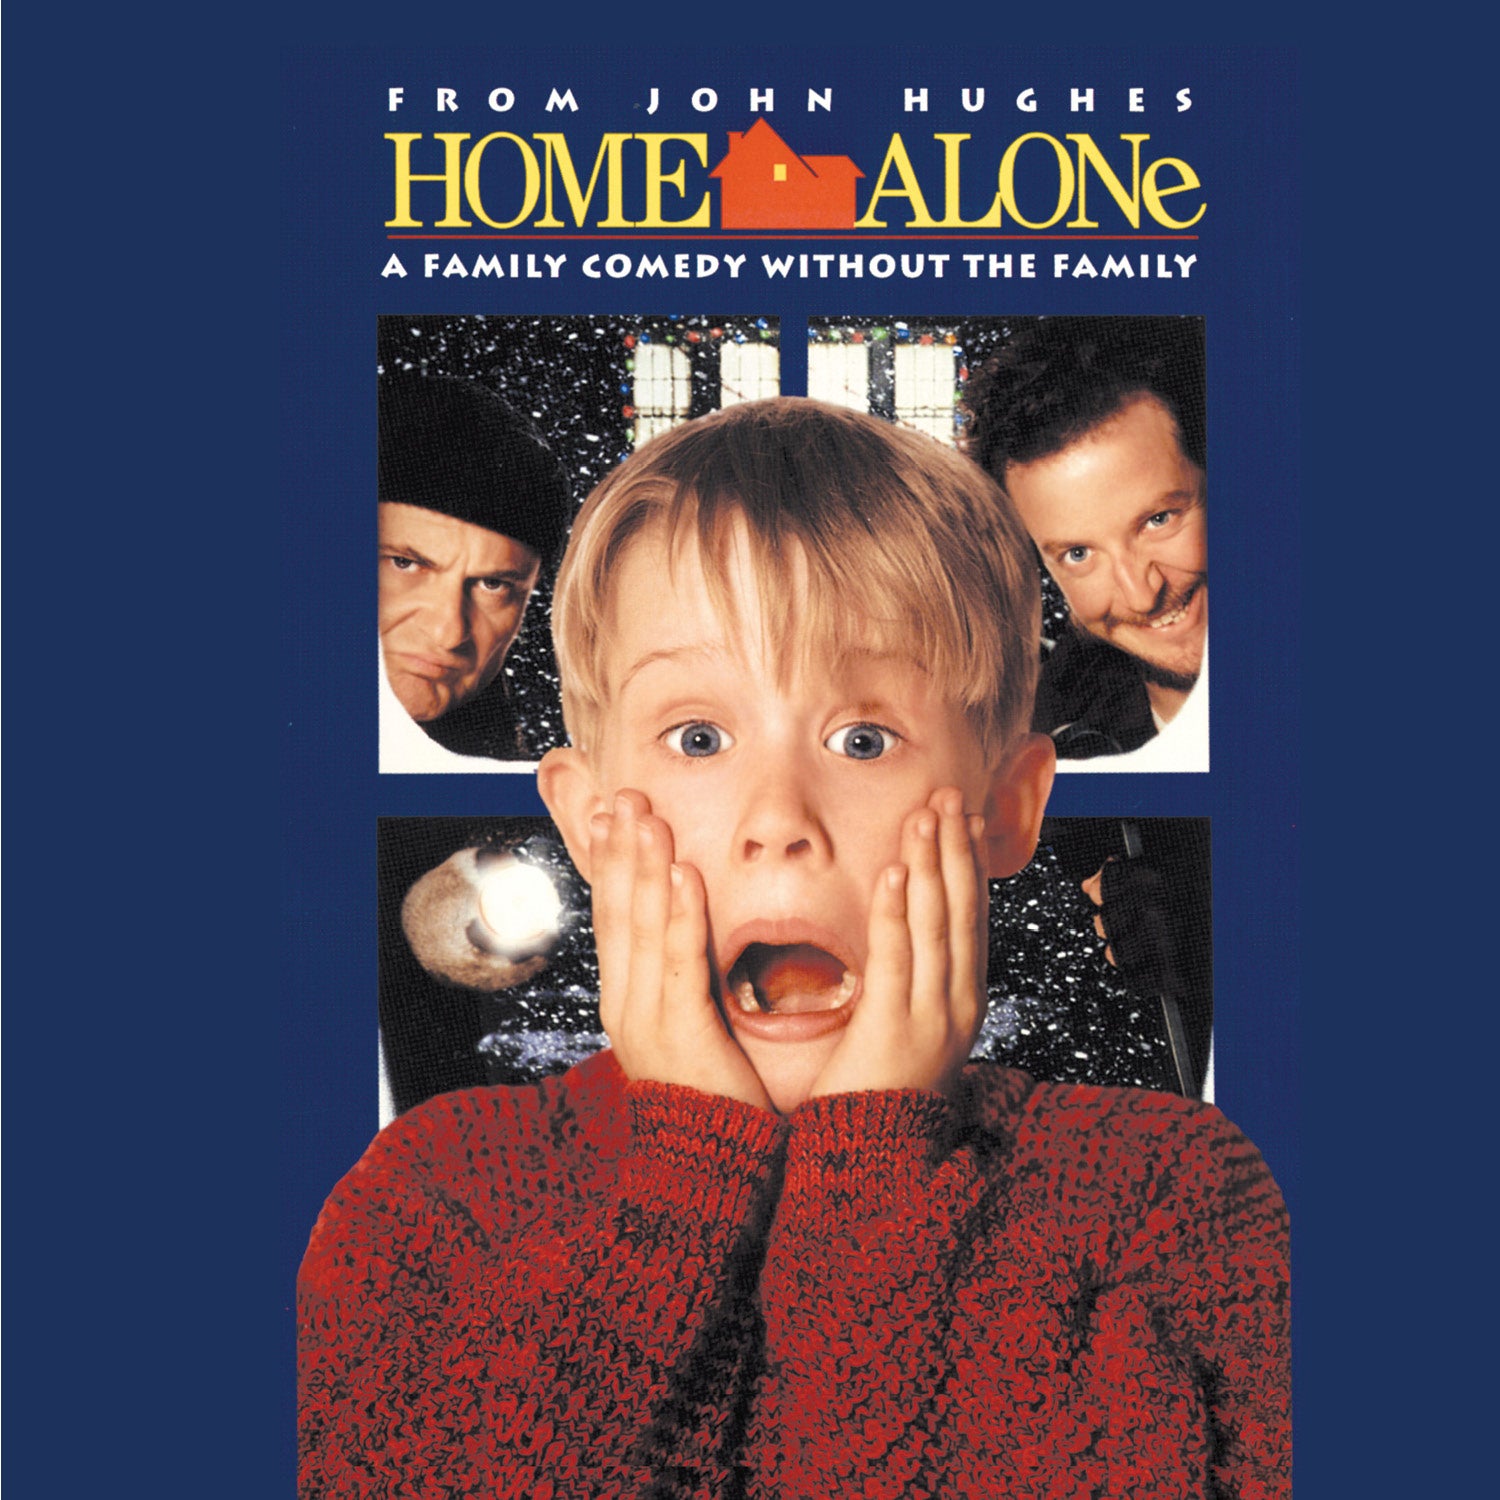 More Info for Home Alone in Concert